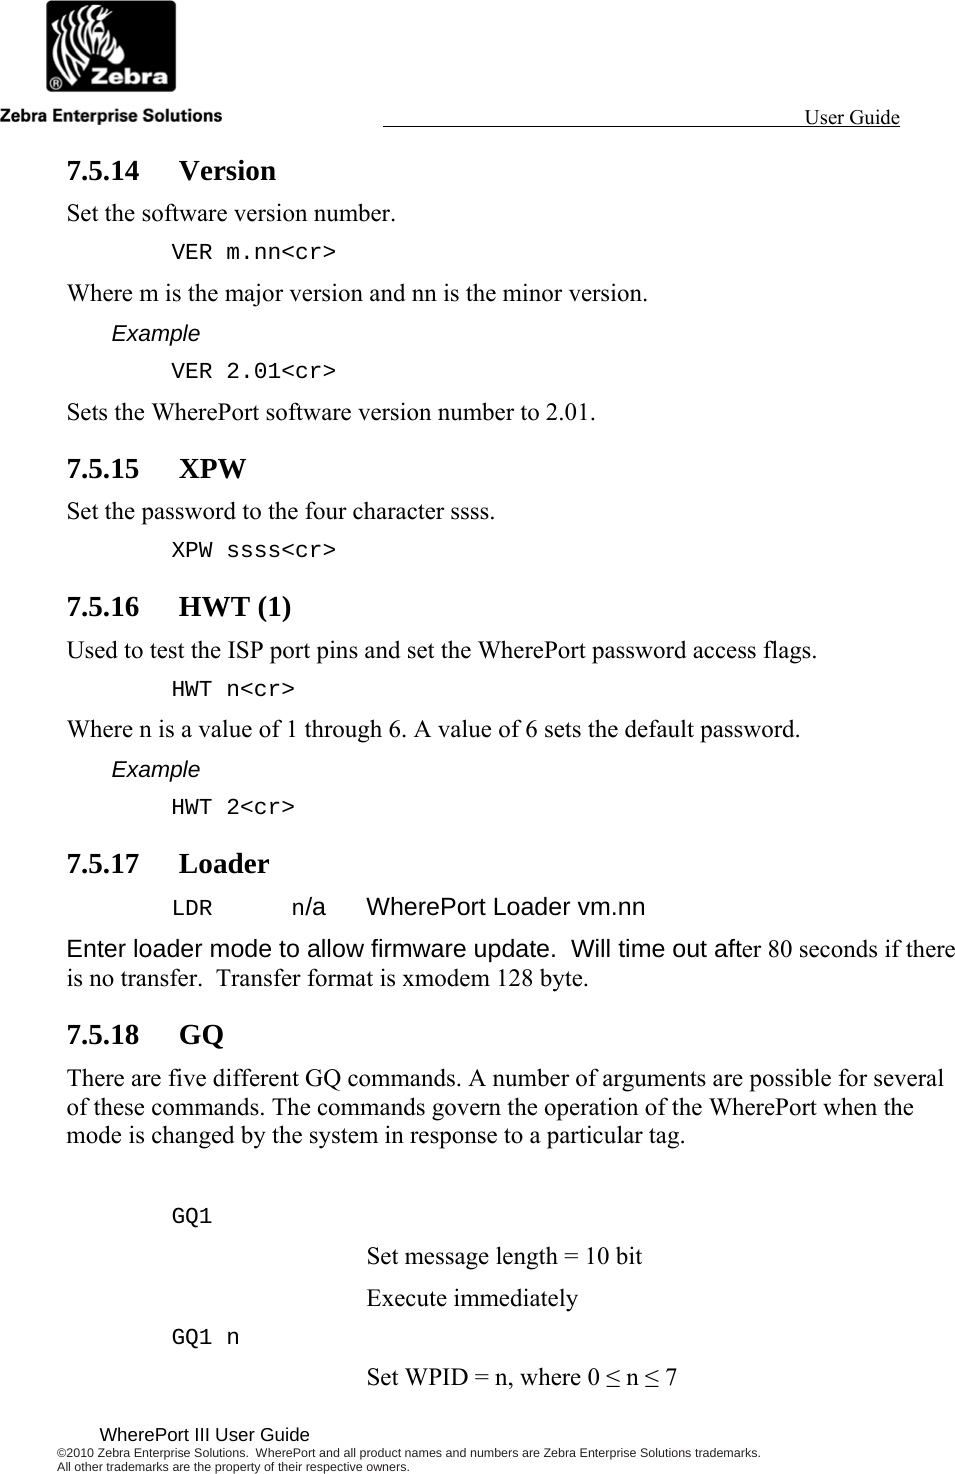                                                                                                                 User Guide                                              WherePort III User Guide ©2010 Zebra Enterprise Solutions.  WherePort and all product names and numbers are Zebra Enterprise Solutions trademarks.  All other trademarks are the property of their respective owners.   7.5.14 Version Set the software version number. VER m.nn&lt;cr&gt; Where m is the major version and nn is the minor version. Example VER 2.01&lt;cr&gt; Sets the WherePort software version number to 2.01. 7.5.15 XPW Set the password to the four character ssss. XPW ssss&lt;cr&gt; 7.5.16 HWT (1) Used to test the ISP port pins and set the WherePort password access flags. HWT n&lt;cr&gt; Where n is a value of 1 through 6. A value of 6 sets the default password. Example HWT 2&lt;cr&gt; 7.5.17 Loader LDR n/a WherePort Loader vm.nn Enter loader mode to allow firmware update.  Will time out after 80 seconds if there is no transfer.  Transfer format is xmodem 128 byte. 7.5.18 GQ There are five different GQ commands. A number of arguments are possible for several of these commands. The commands govern the operation of the WherePort when the mode is changed by the system in response to a particular tag.  GQ1     Set message length = 10 bit   Execute immediately GQ1 n     Set WPID = n, where 0 ≤ n ≤ 7 